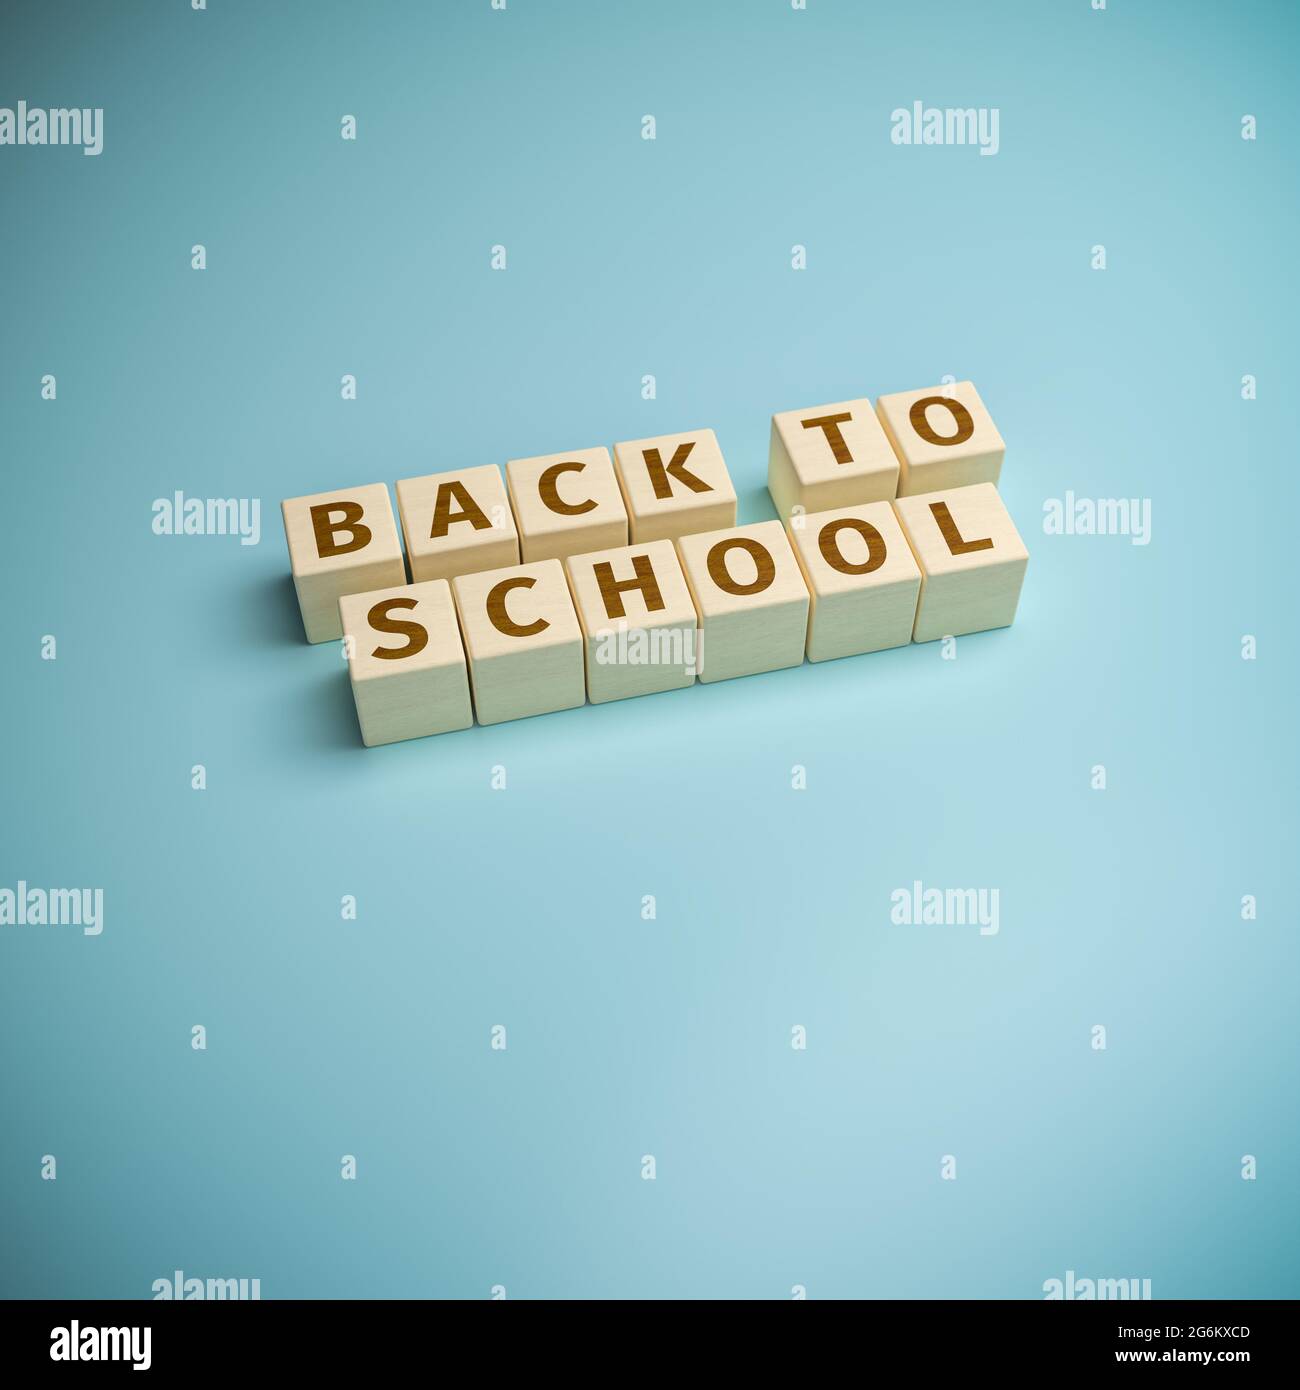 Wooden toy blocks forming the words 'back to school'. Schools reopening after the summer holidays. Stock Photo